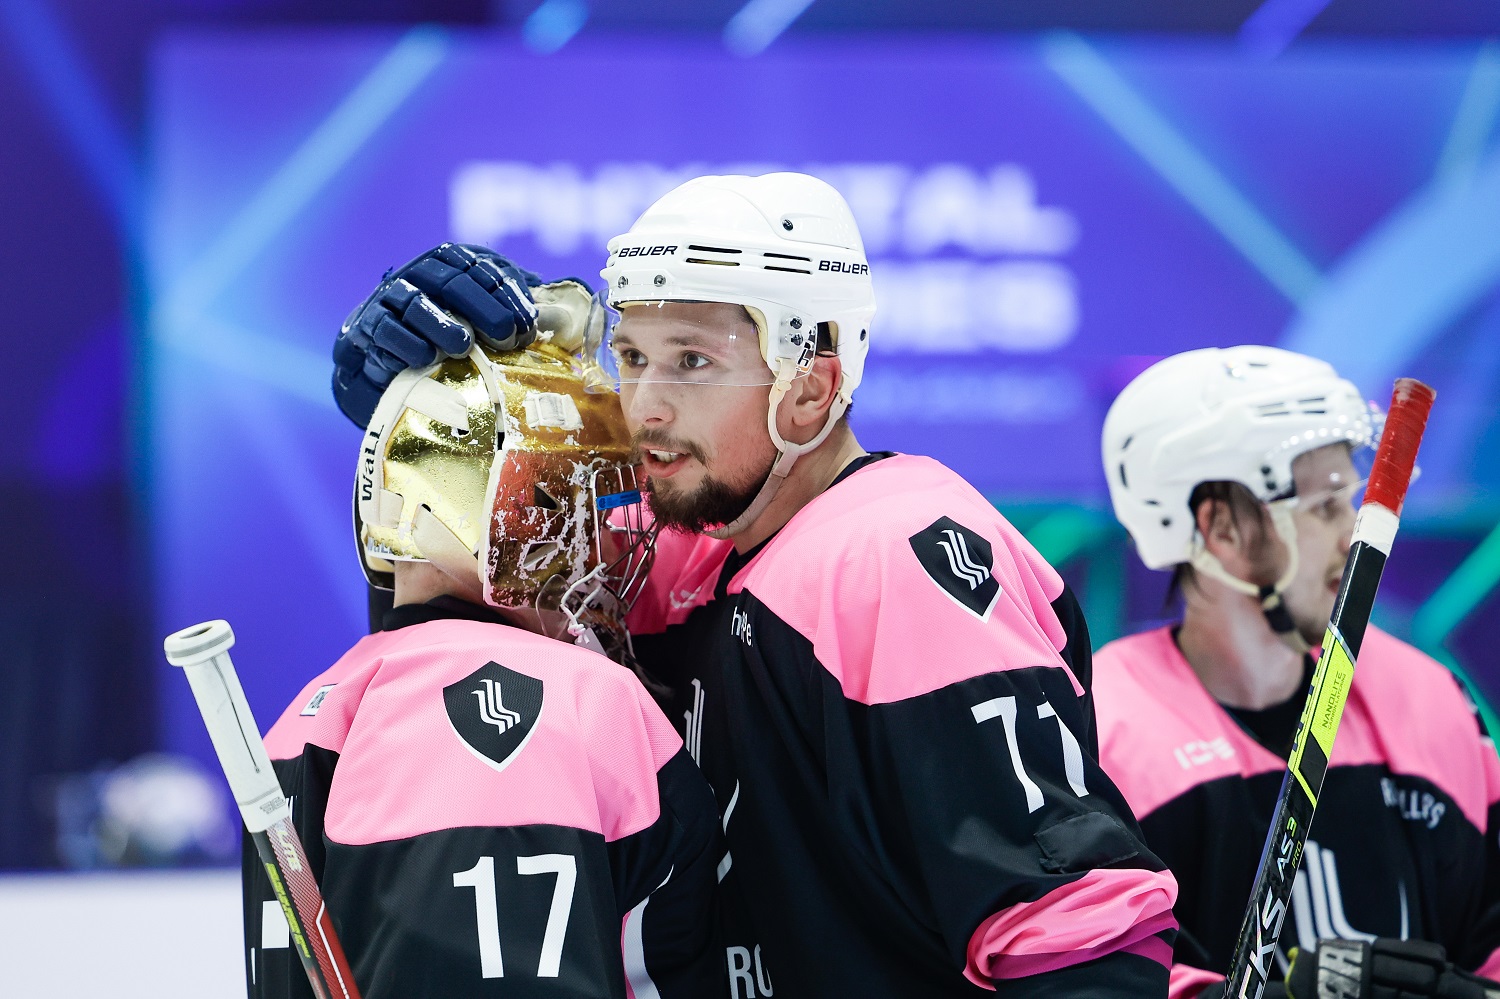 Ak Bars and Liga Pro Team will play in the final of the Phygital Games 7 in hockey